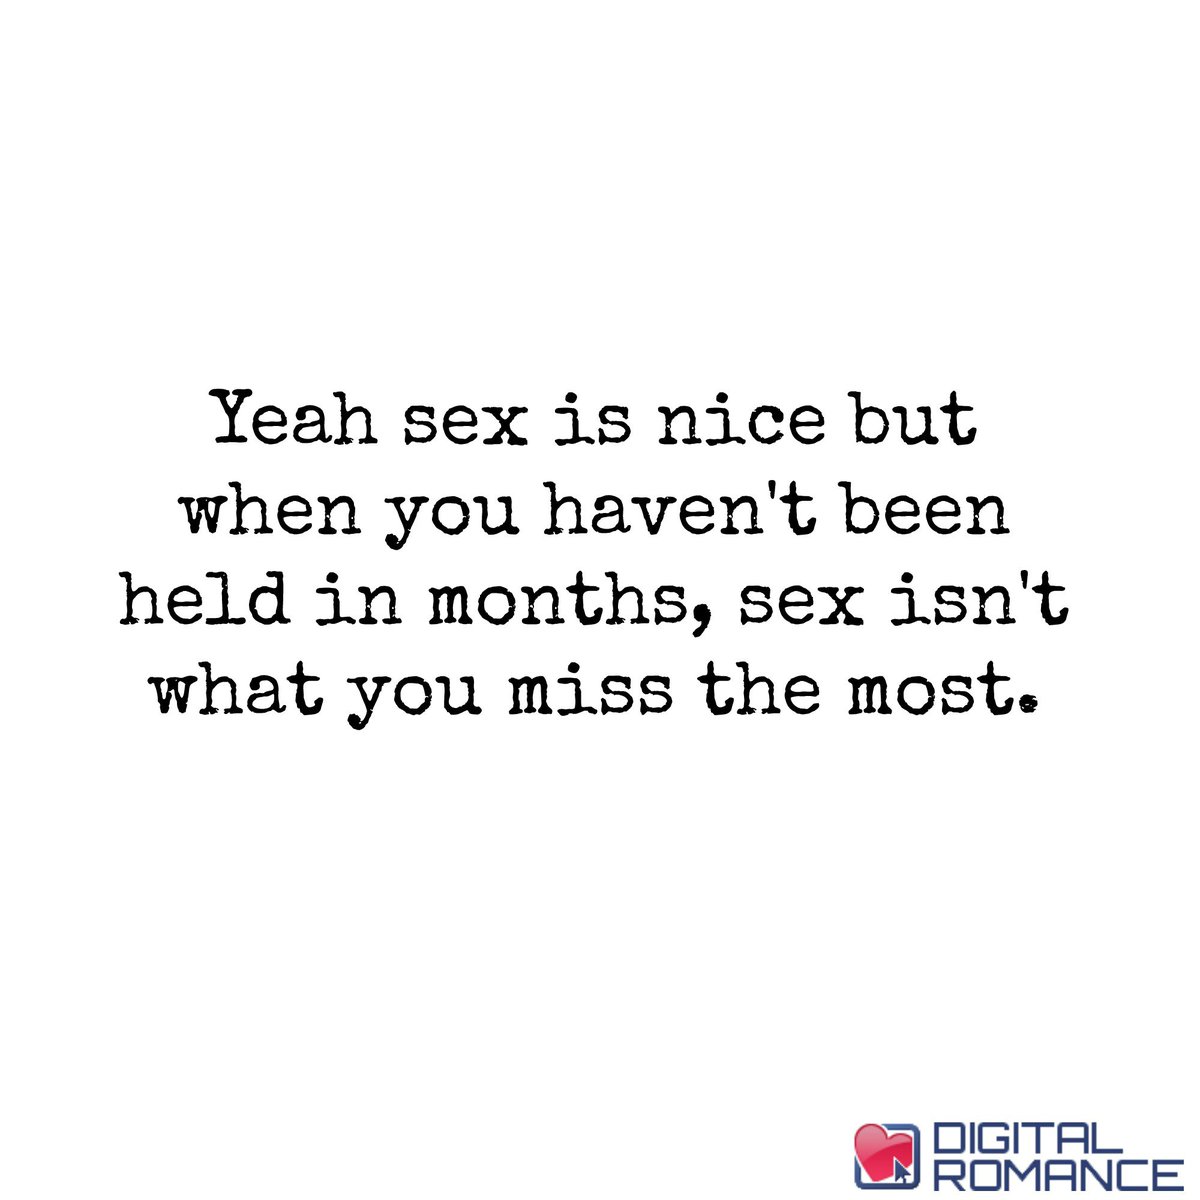 Digital Romance Inc on Twitter "Yeah is nice but when you haven t been held in months isn t what you miss the most love quotes